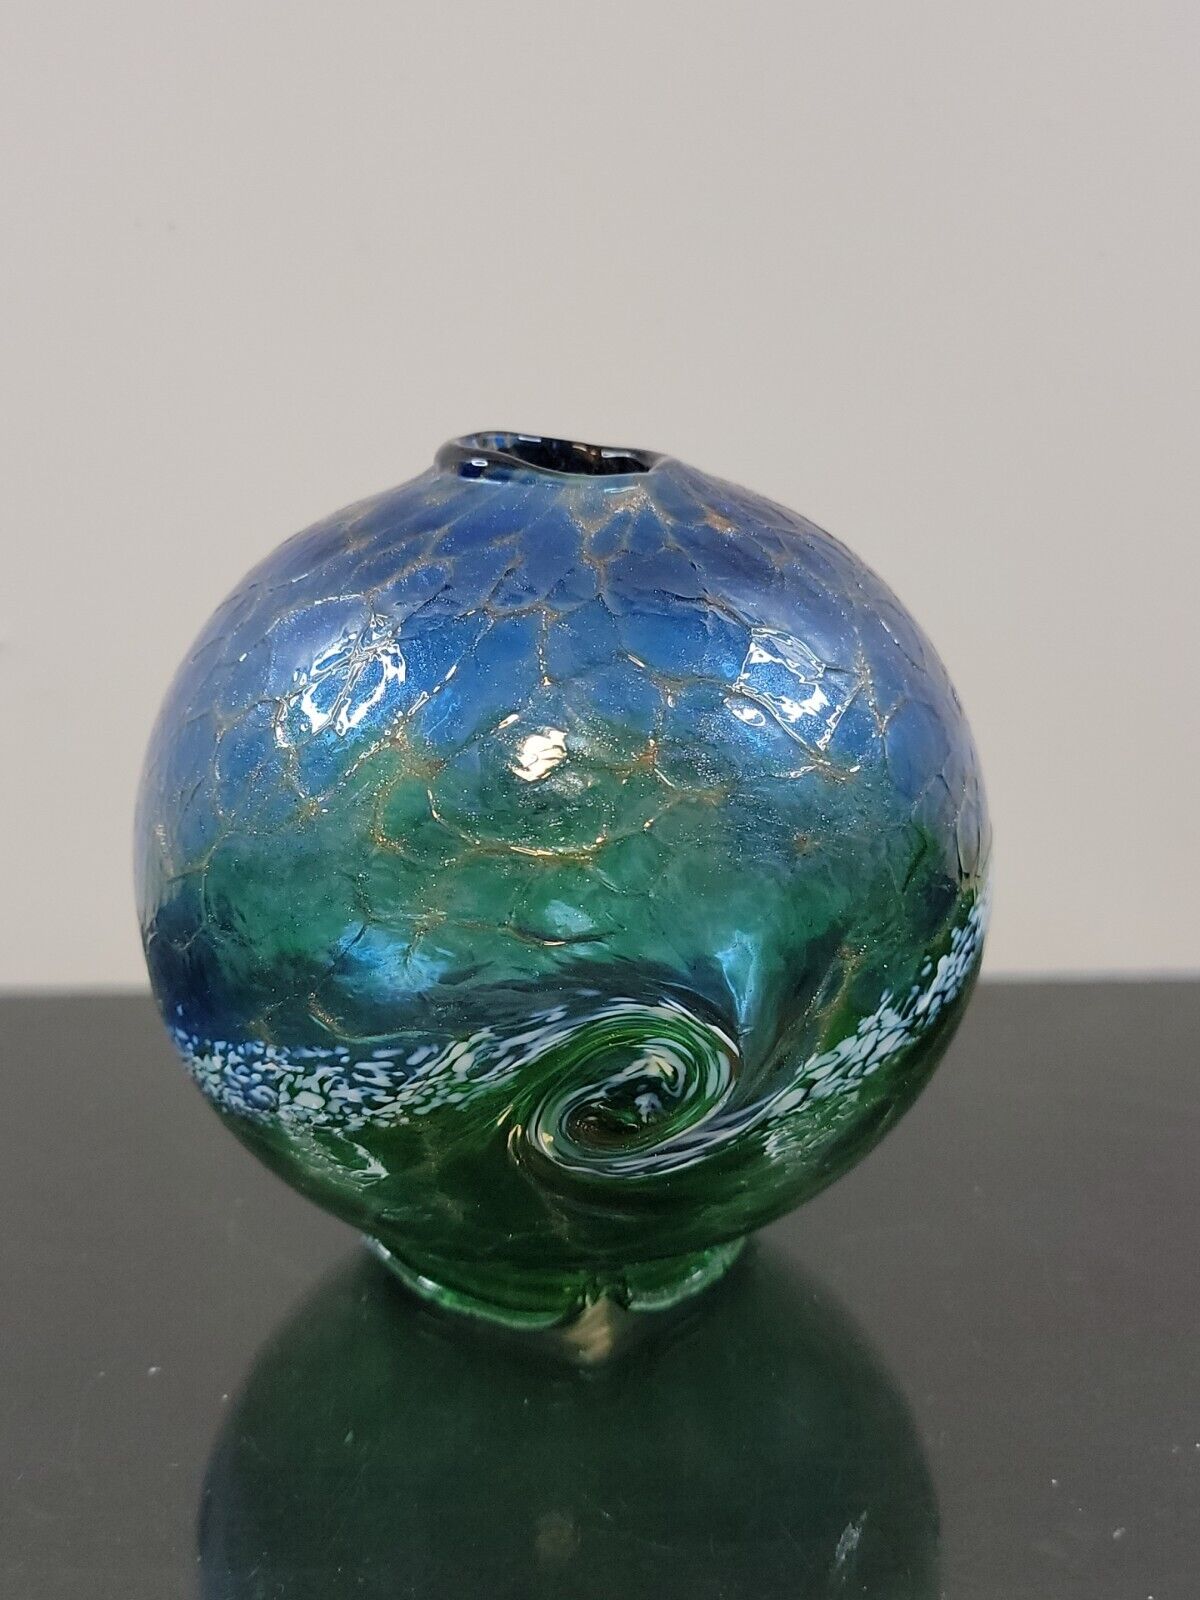 Kitras Art Glass Blue And Green VanGogh “Starry Nights “Glow Candle Dome